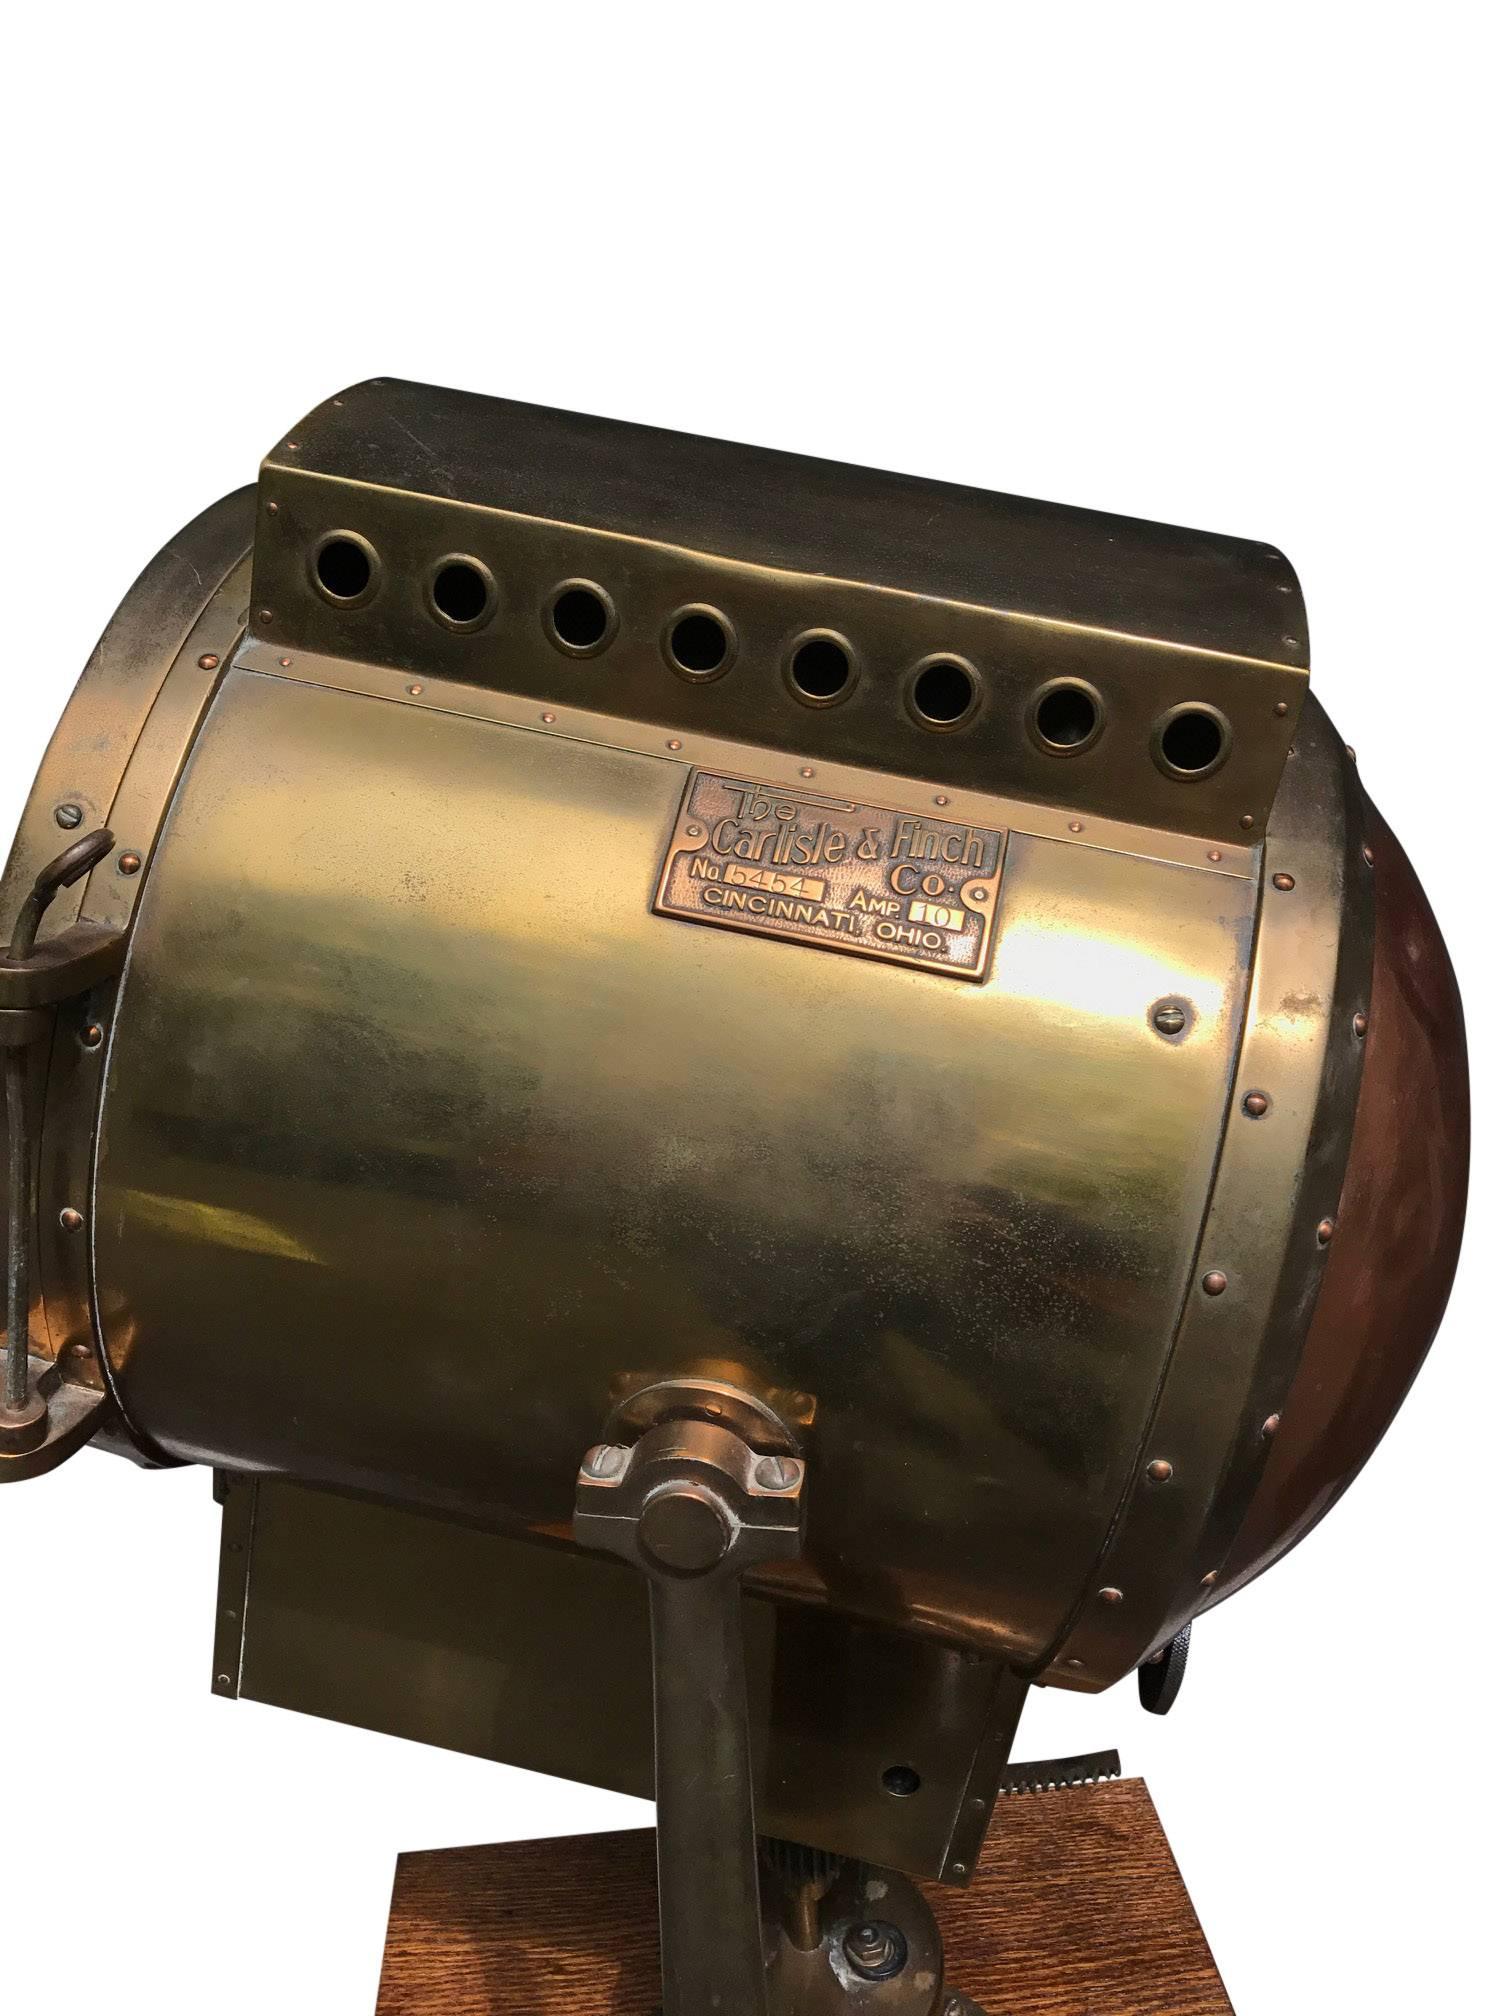 ww2 searchlight for sale uk